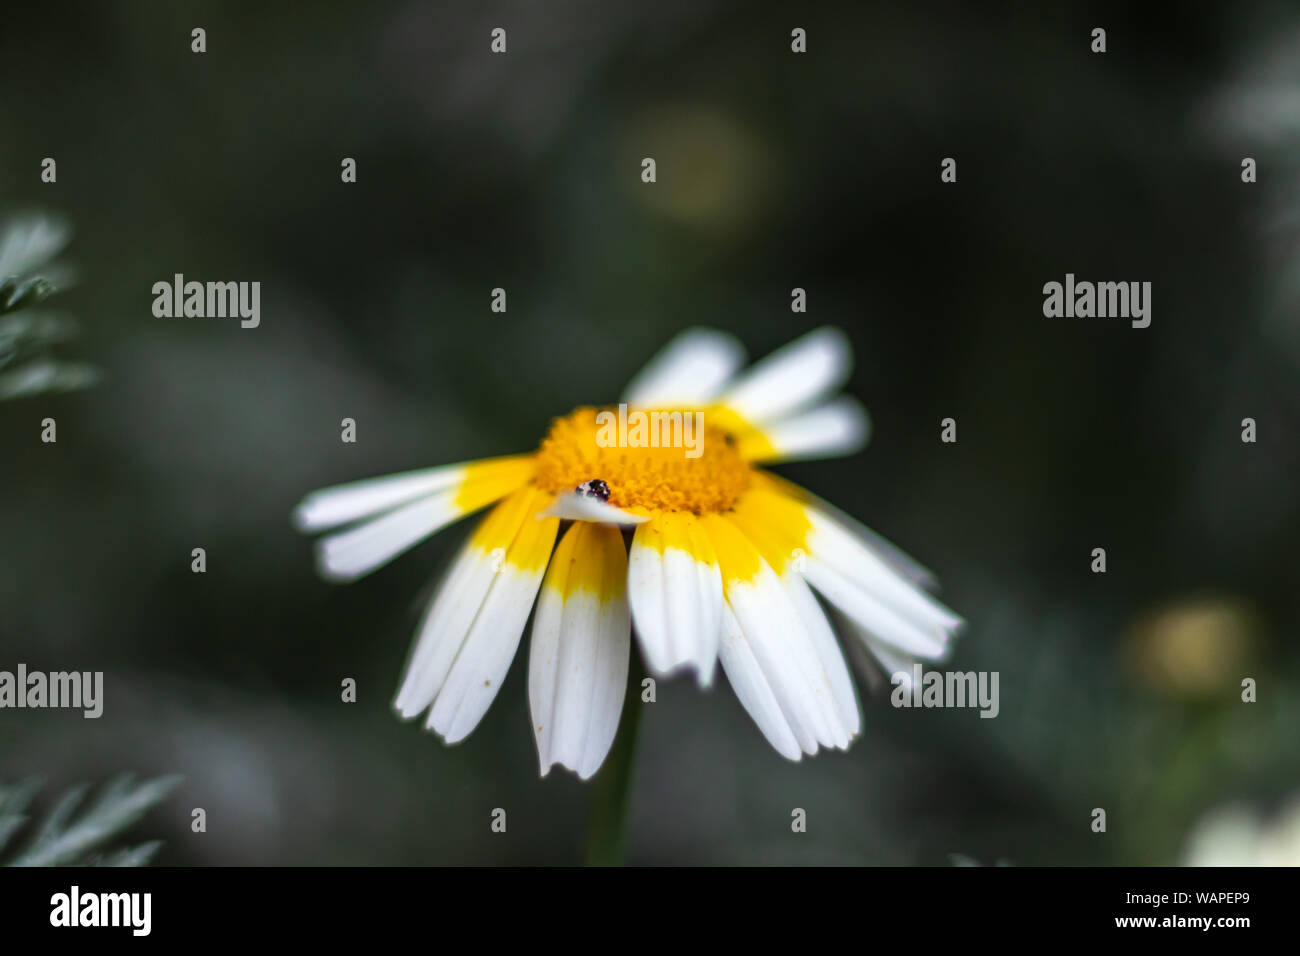 a closeup shoot to cute little daisy - background is blurry. nature shoot has taken from izmir/turkey. Stock Photo